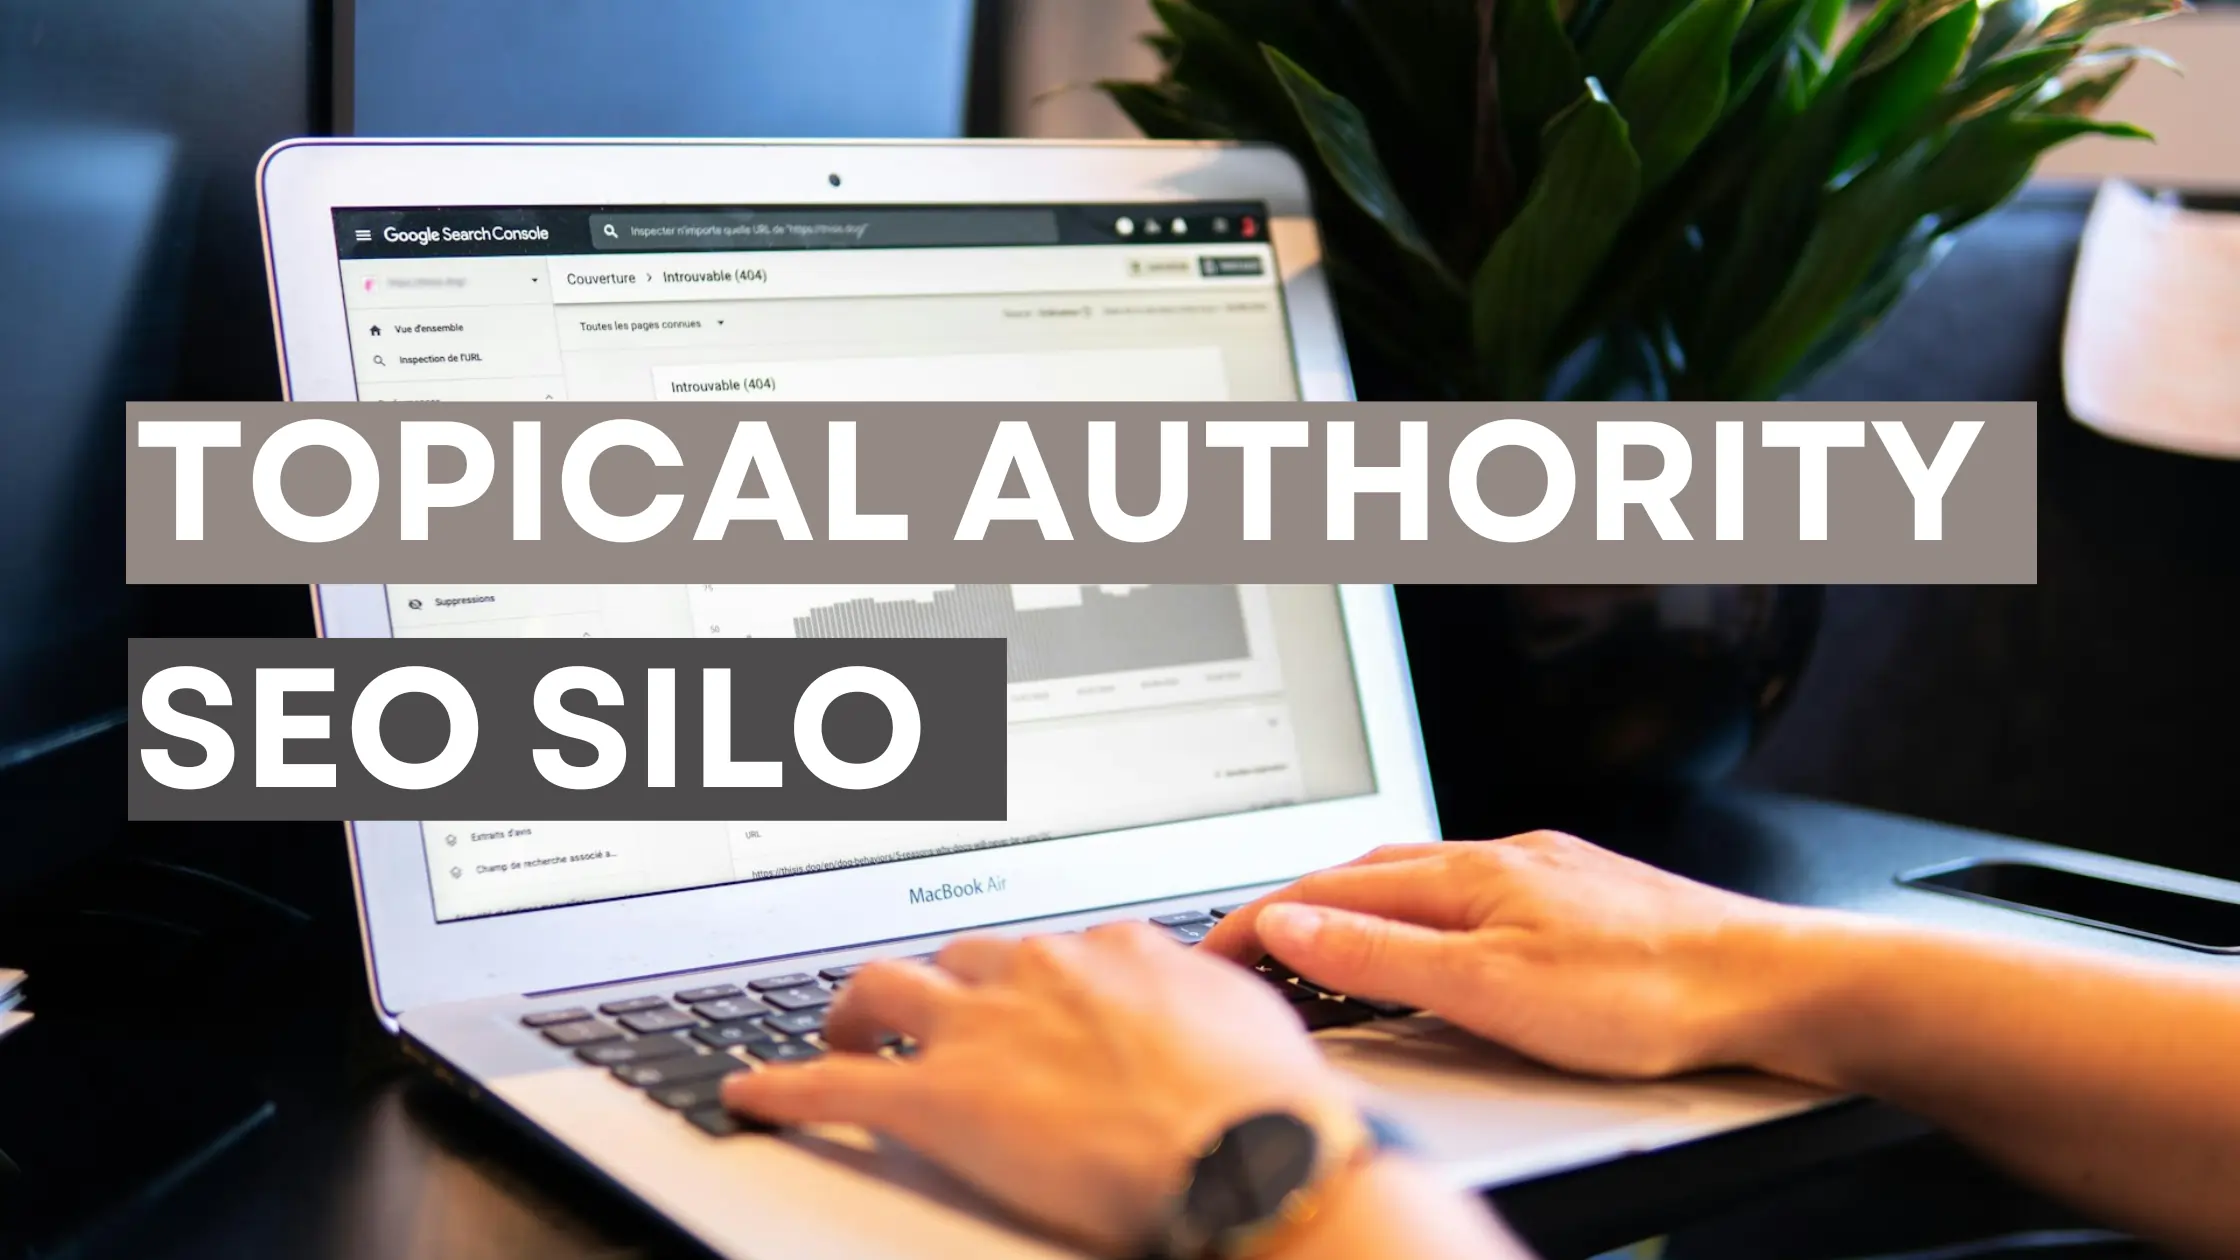 Topical Authority SEO Silos For Websites